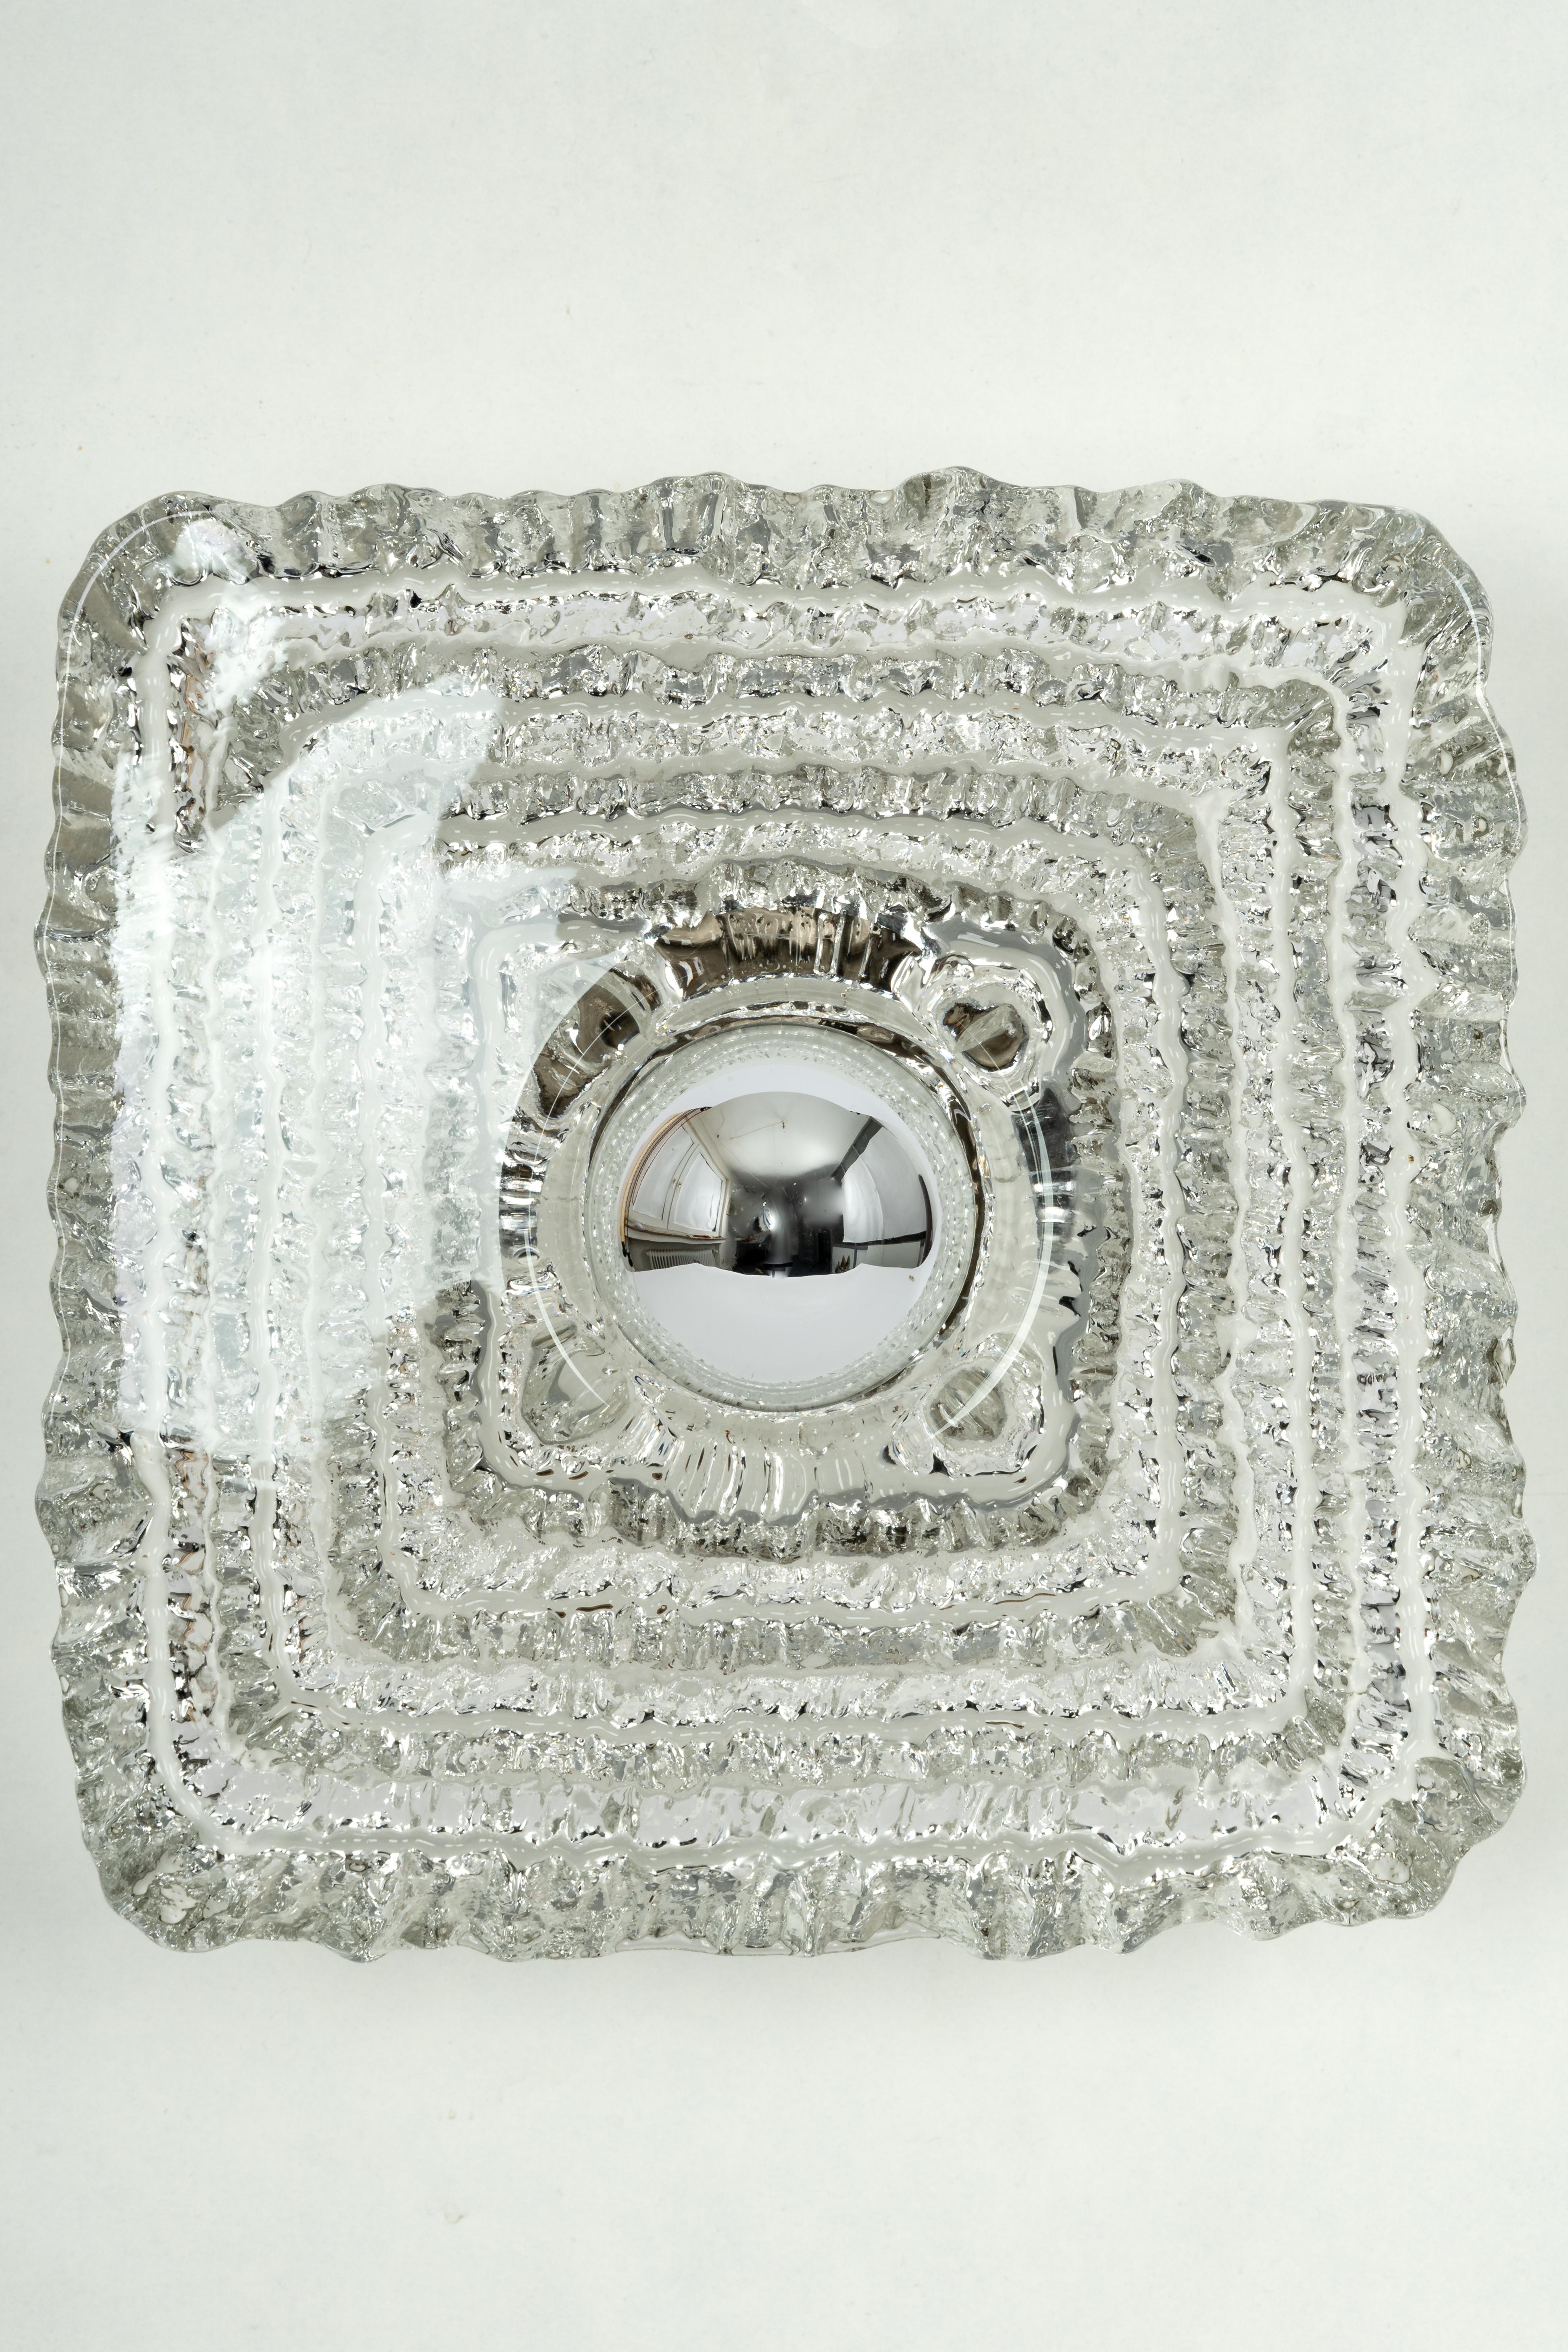 Exclusive Sputnik crystal glass wall sconce by Peil & Putzler, Germany, 1970s 
Wonderful light effect.
Extremely rare!

High quality and in very good condition. Cleaned, well-wired and ready to use. 

Each fixture requires 1 x E27 Standard